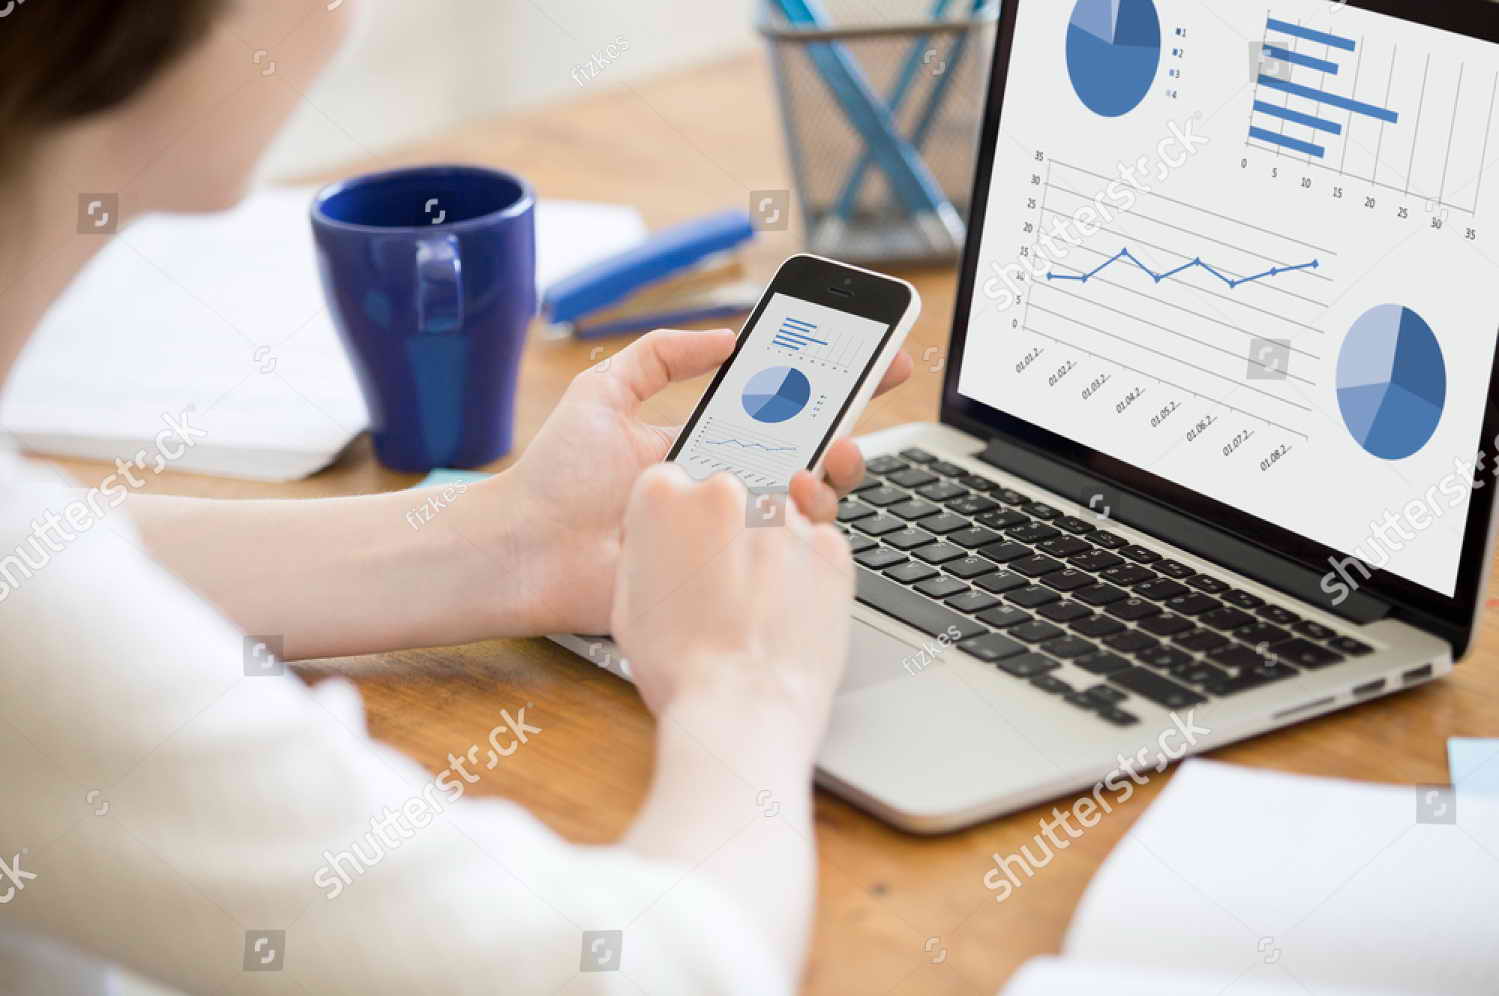 stock-photo-close-up-rear-view-of-young-business-woman-working-in-office-interior-on-pc-holding-smartphone-and-472132963